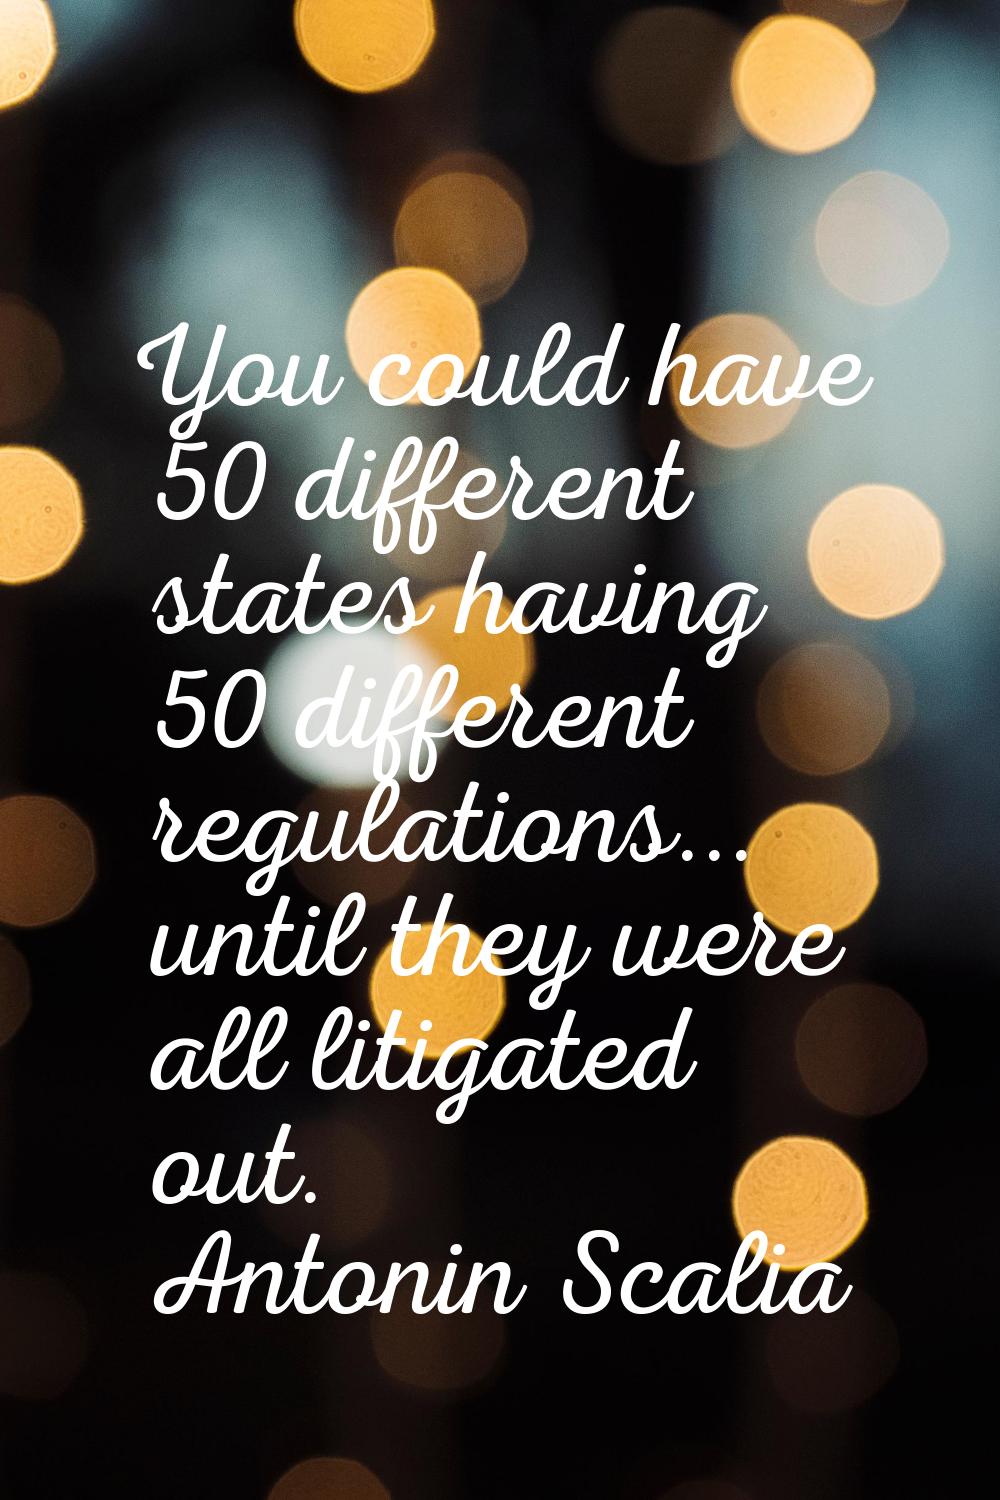 You could have 50 different states having 50 different regulations... until they were all litigated